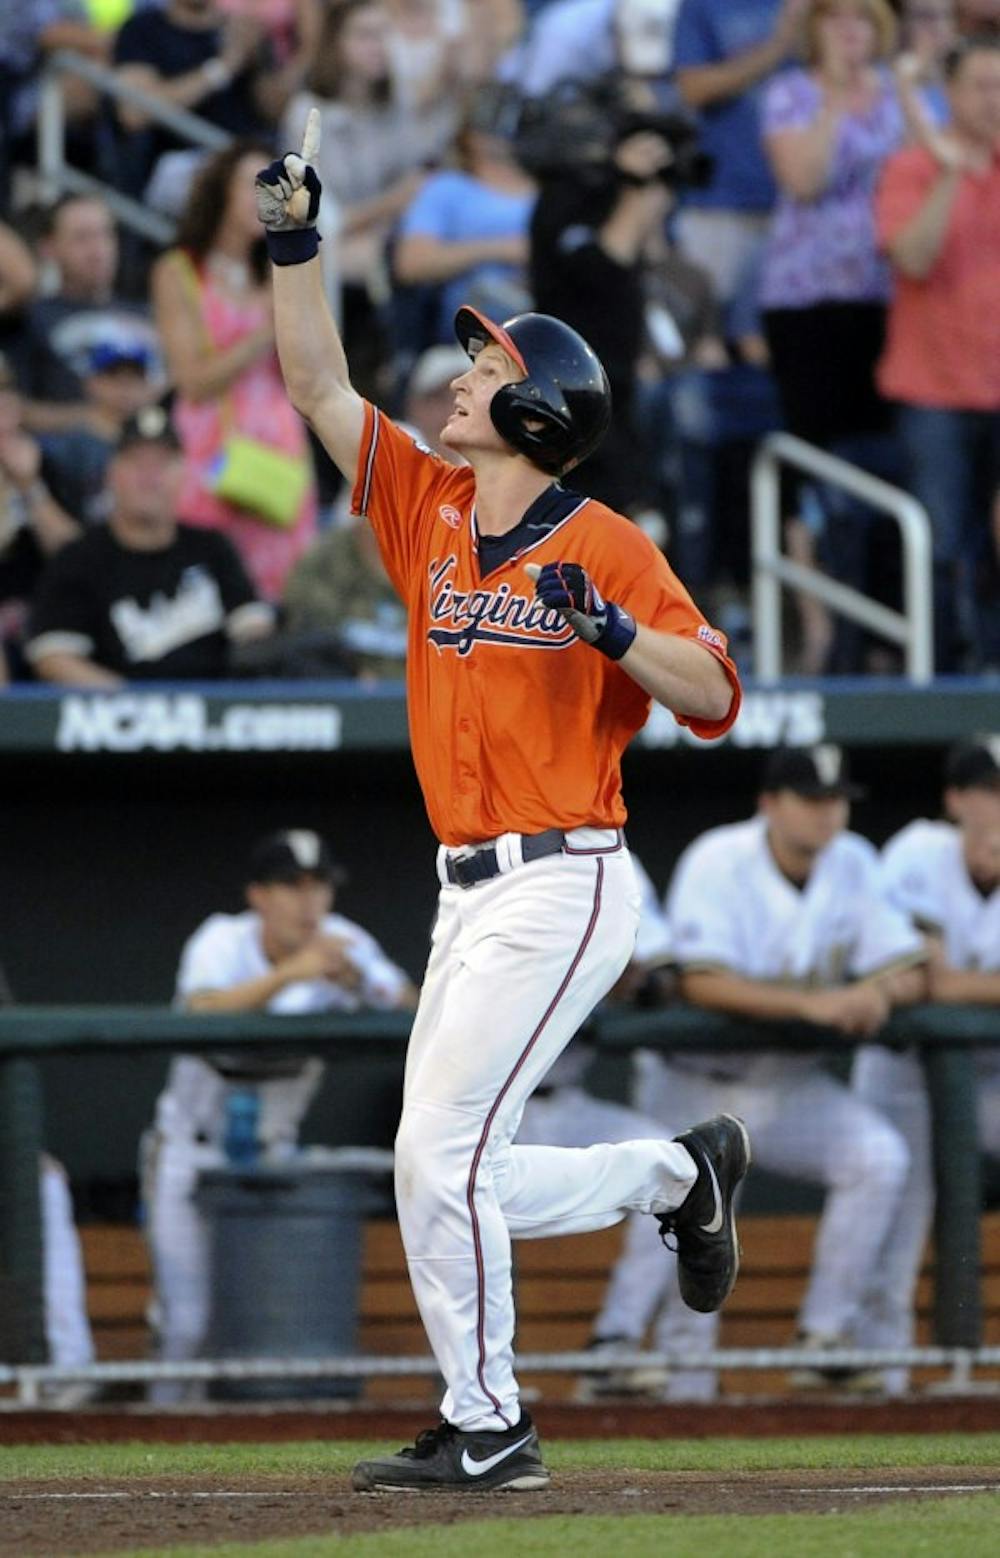 <p>Junior first baseman Pavin Smith&nbsp;hit a two-run blast in the top of the fourth inning in Virginia's 10-9 rubber match victory over Georgia Tech.</p>